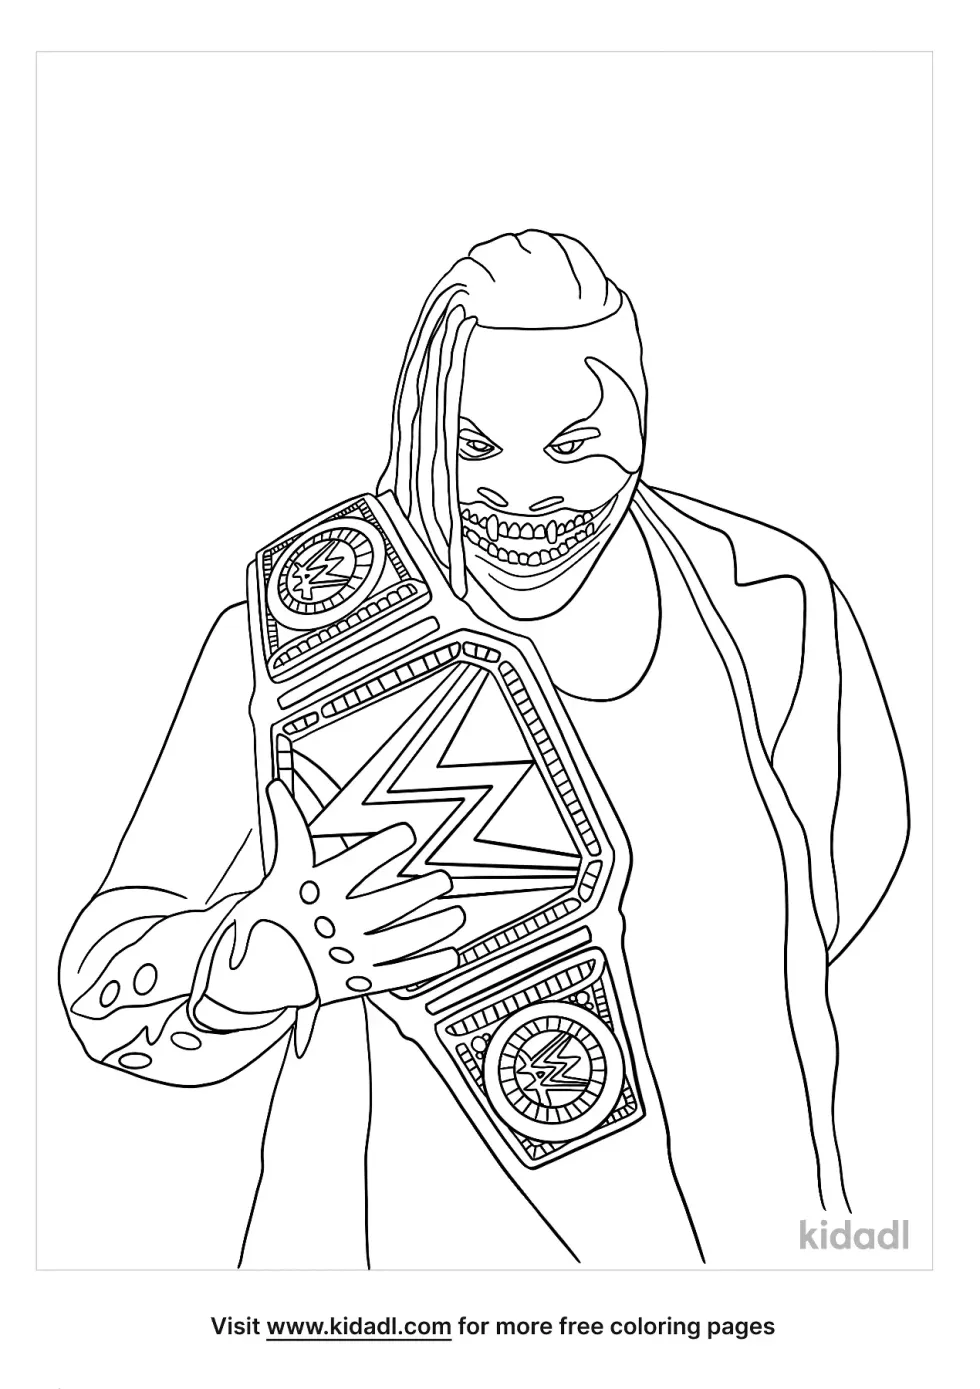 Bray Wyatt Coloring Page